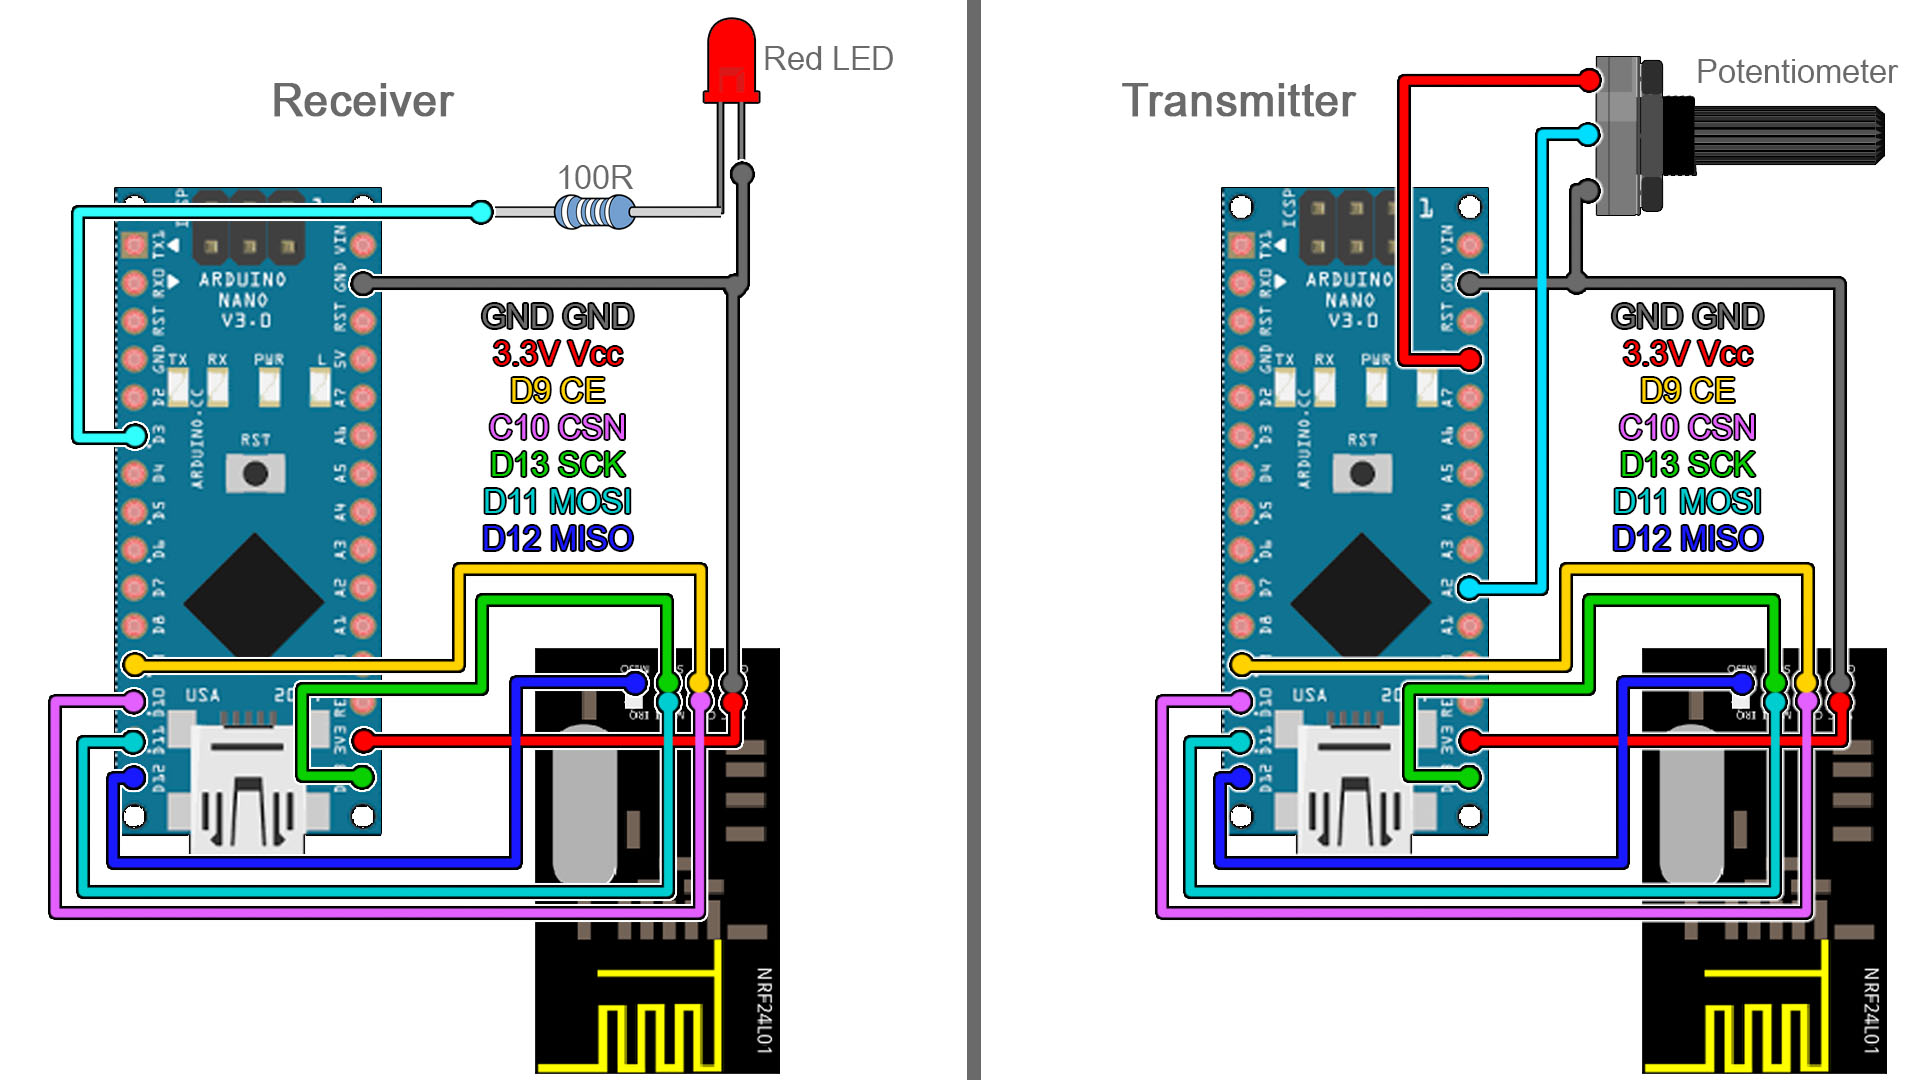 how to use wire h library nano arduino